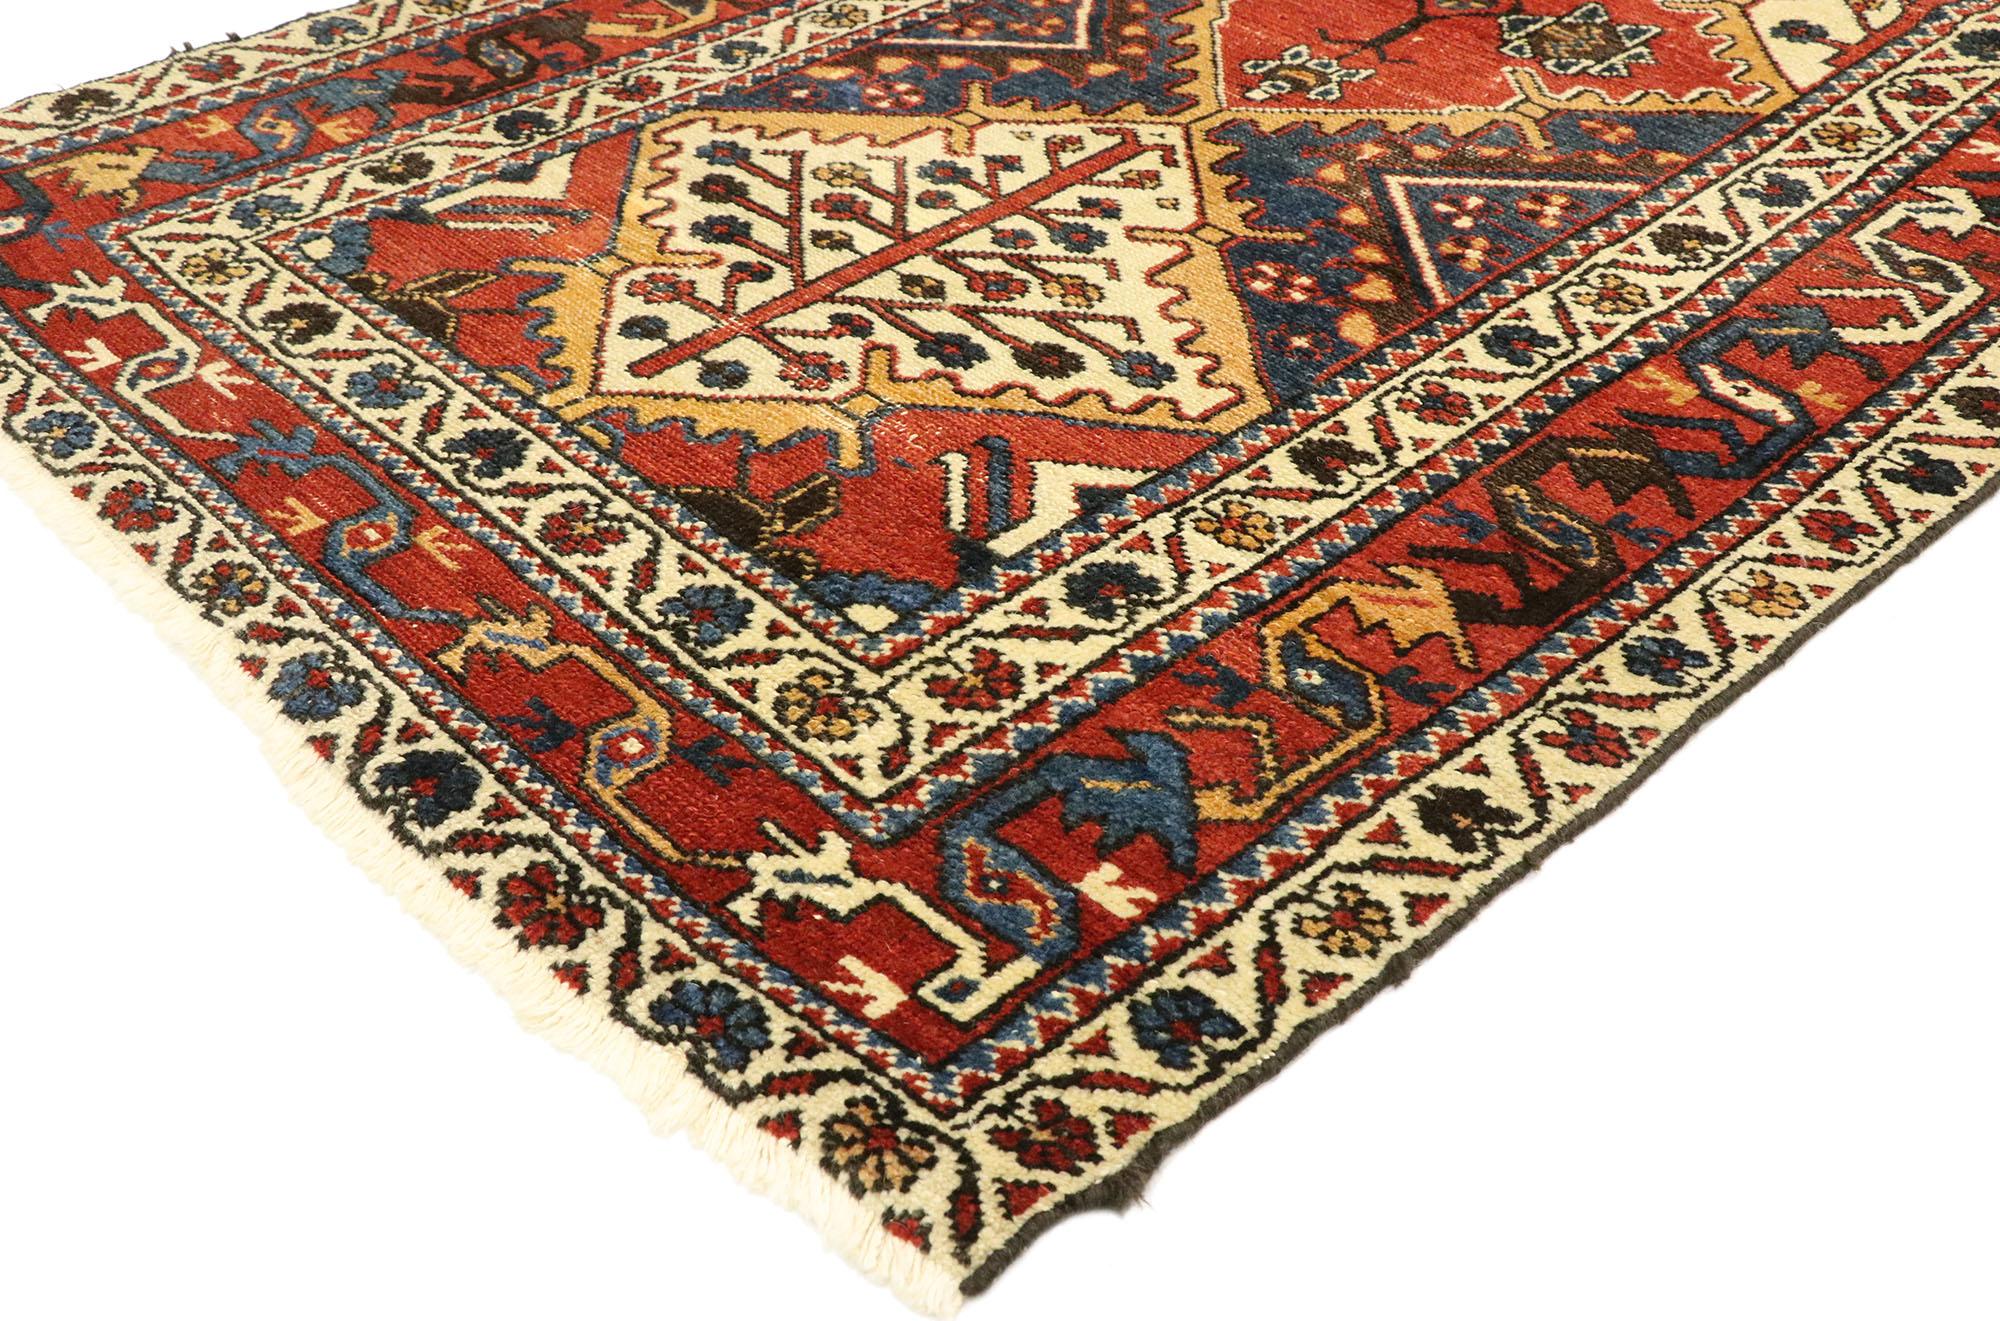 77458 antique Persian Bakhtiari runner with modern rustic Pacific Northwest style 03'03 x 12'10. Down-to-earth vibes and rustic sensibility meet Pacific Northwest style in this hand knotted wool antique Persian Bakhtiari runner. The abrashed field